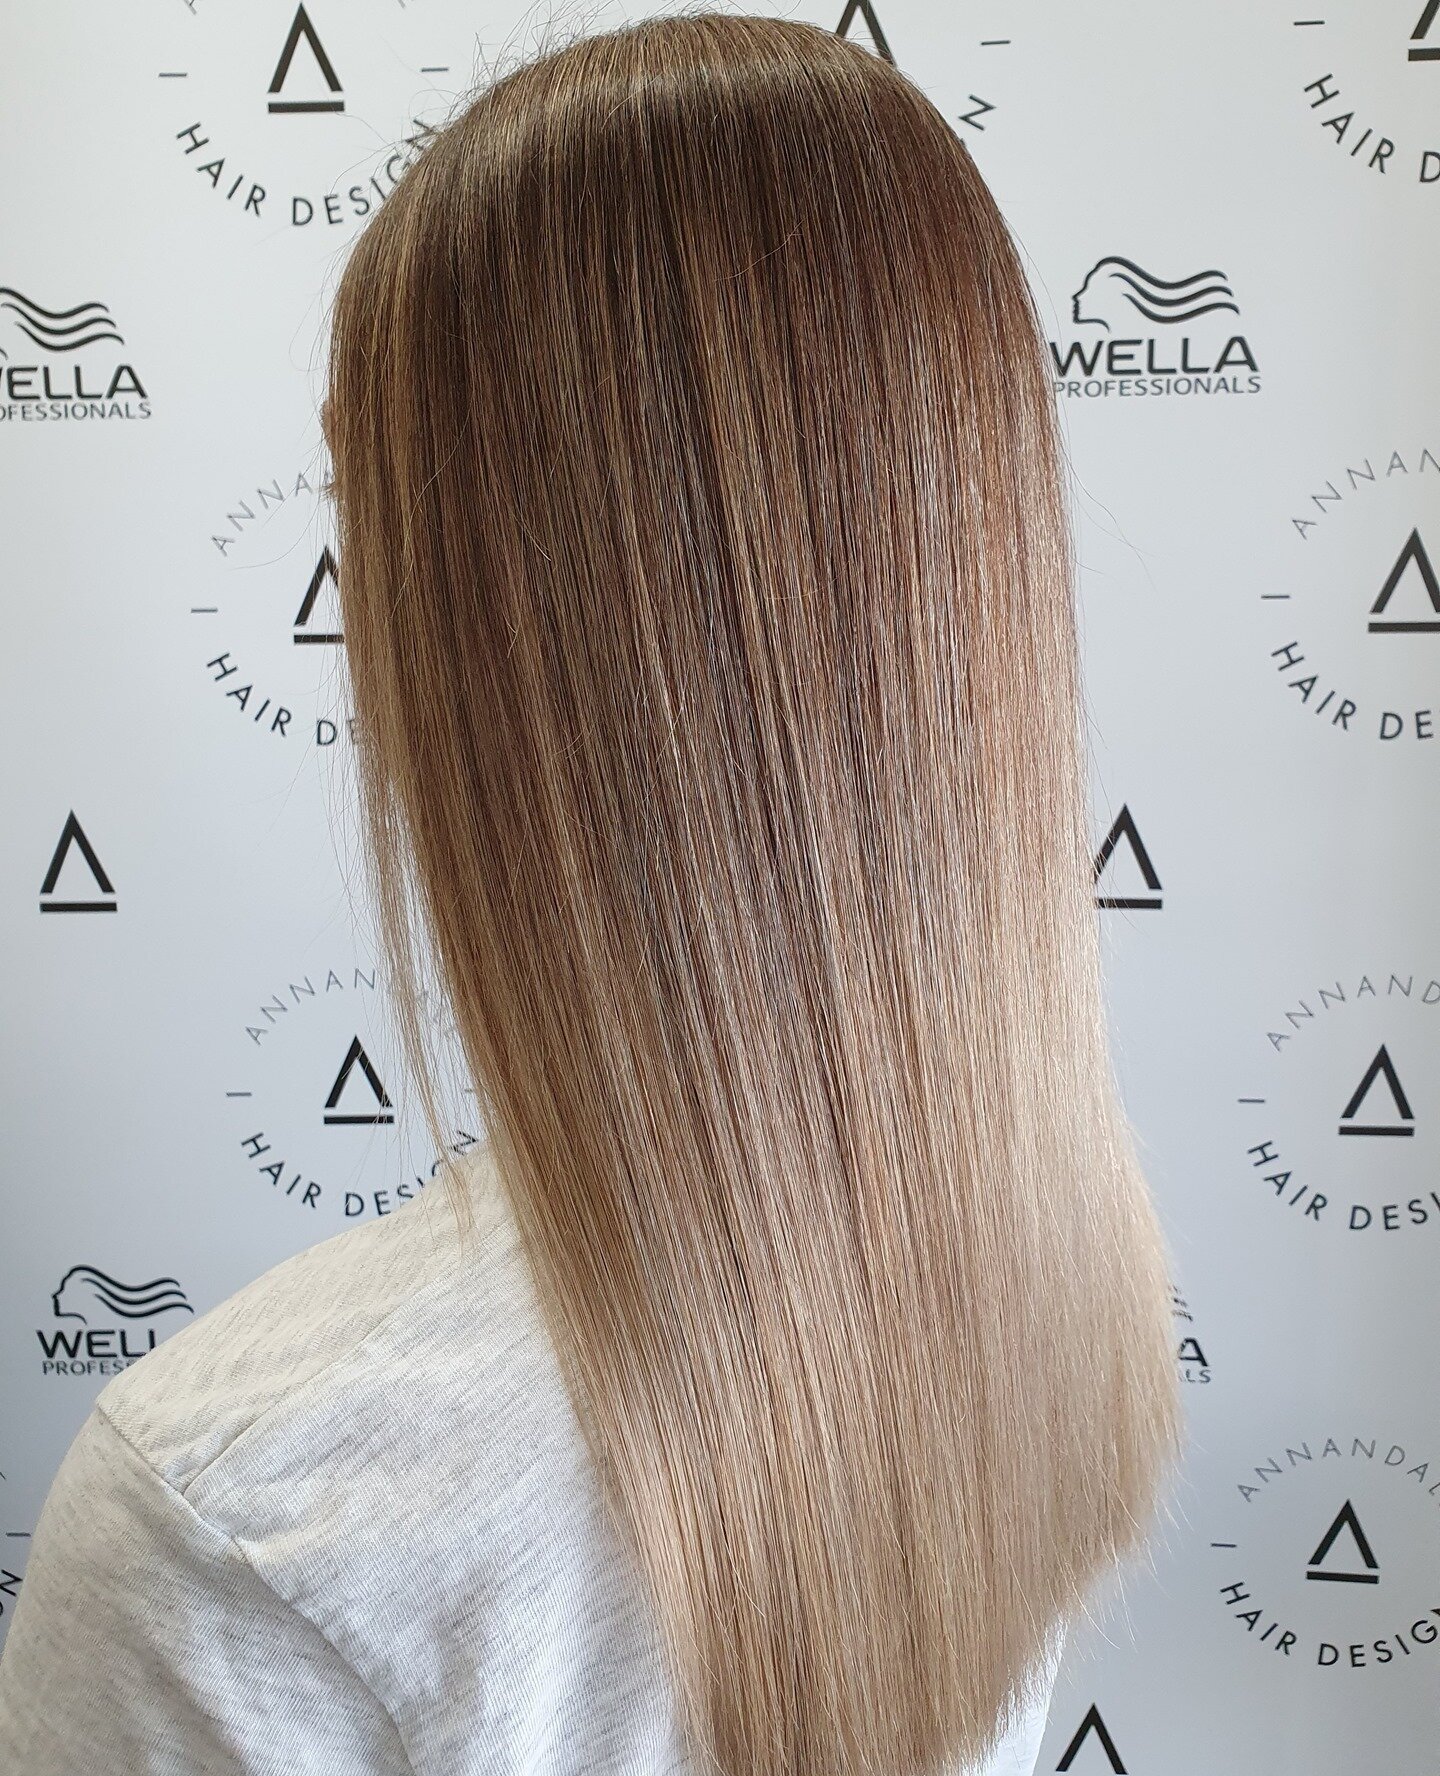 Want the blonde look, but without the ongoing maintenance? 💁🏼&zwj;♀️⁠
⁠
A soft balayage is low maintenance whilst looking effortless stunning! ⁠
⁠
Hair by our Creative Director, Amanda ✂️⁠
⁠
.⁠
.⁠
.⁠
⁠
#AnnandaleHairDesign #Hair #Salon #Hairdresser